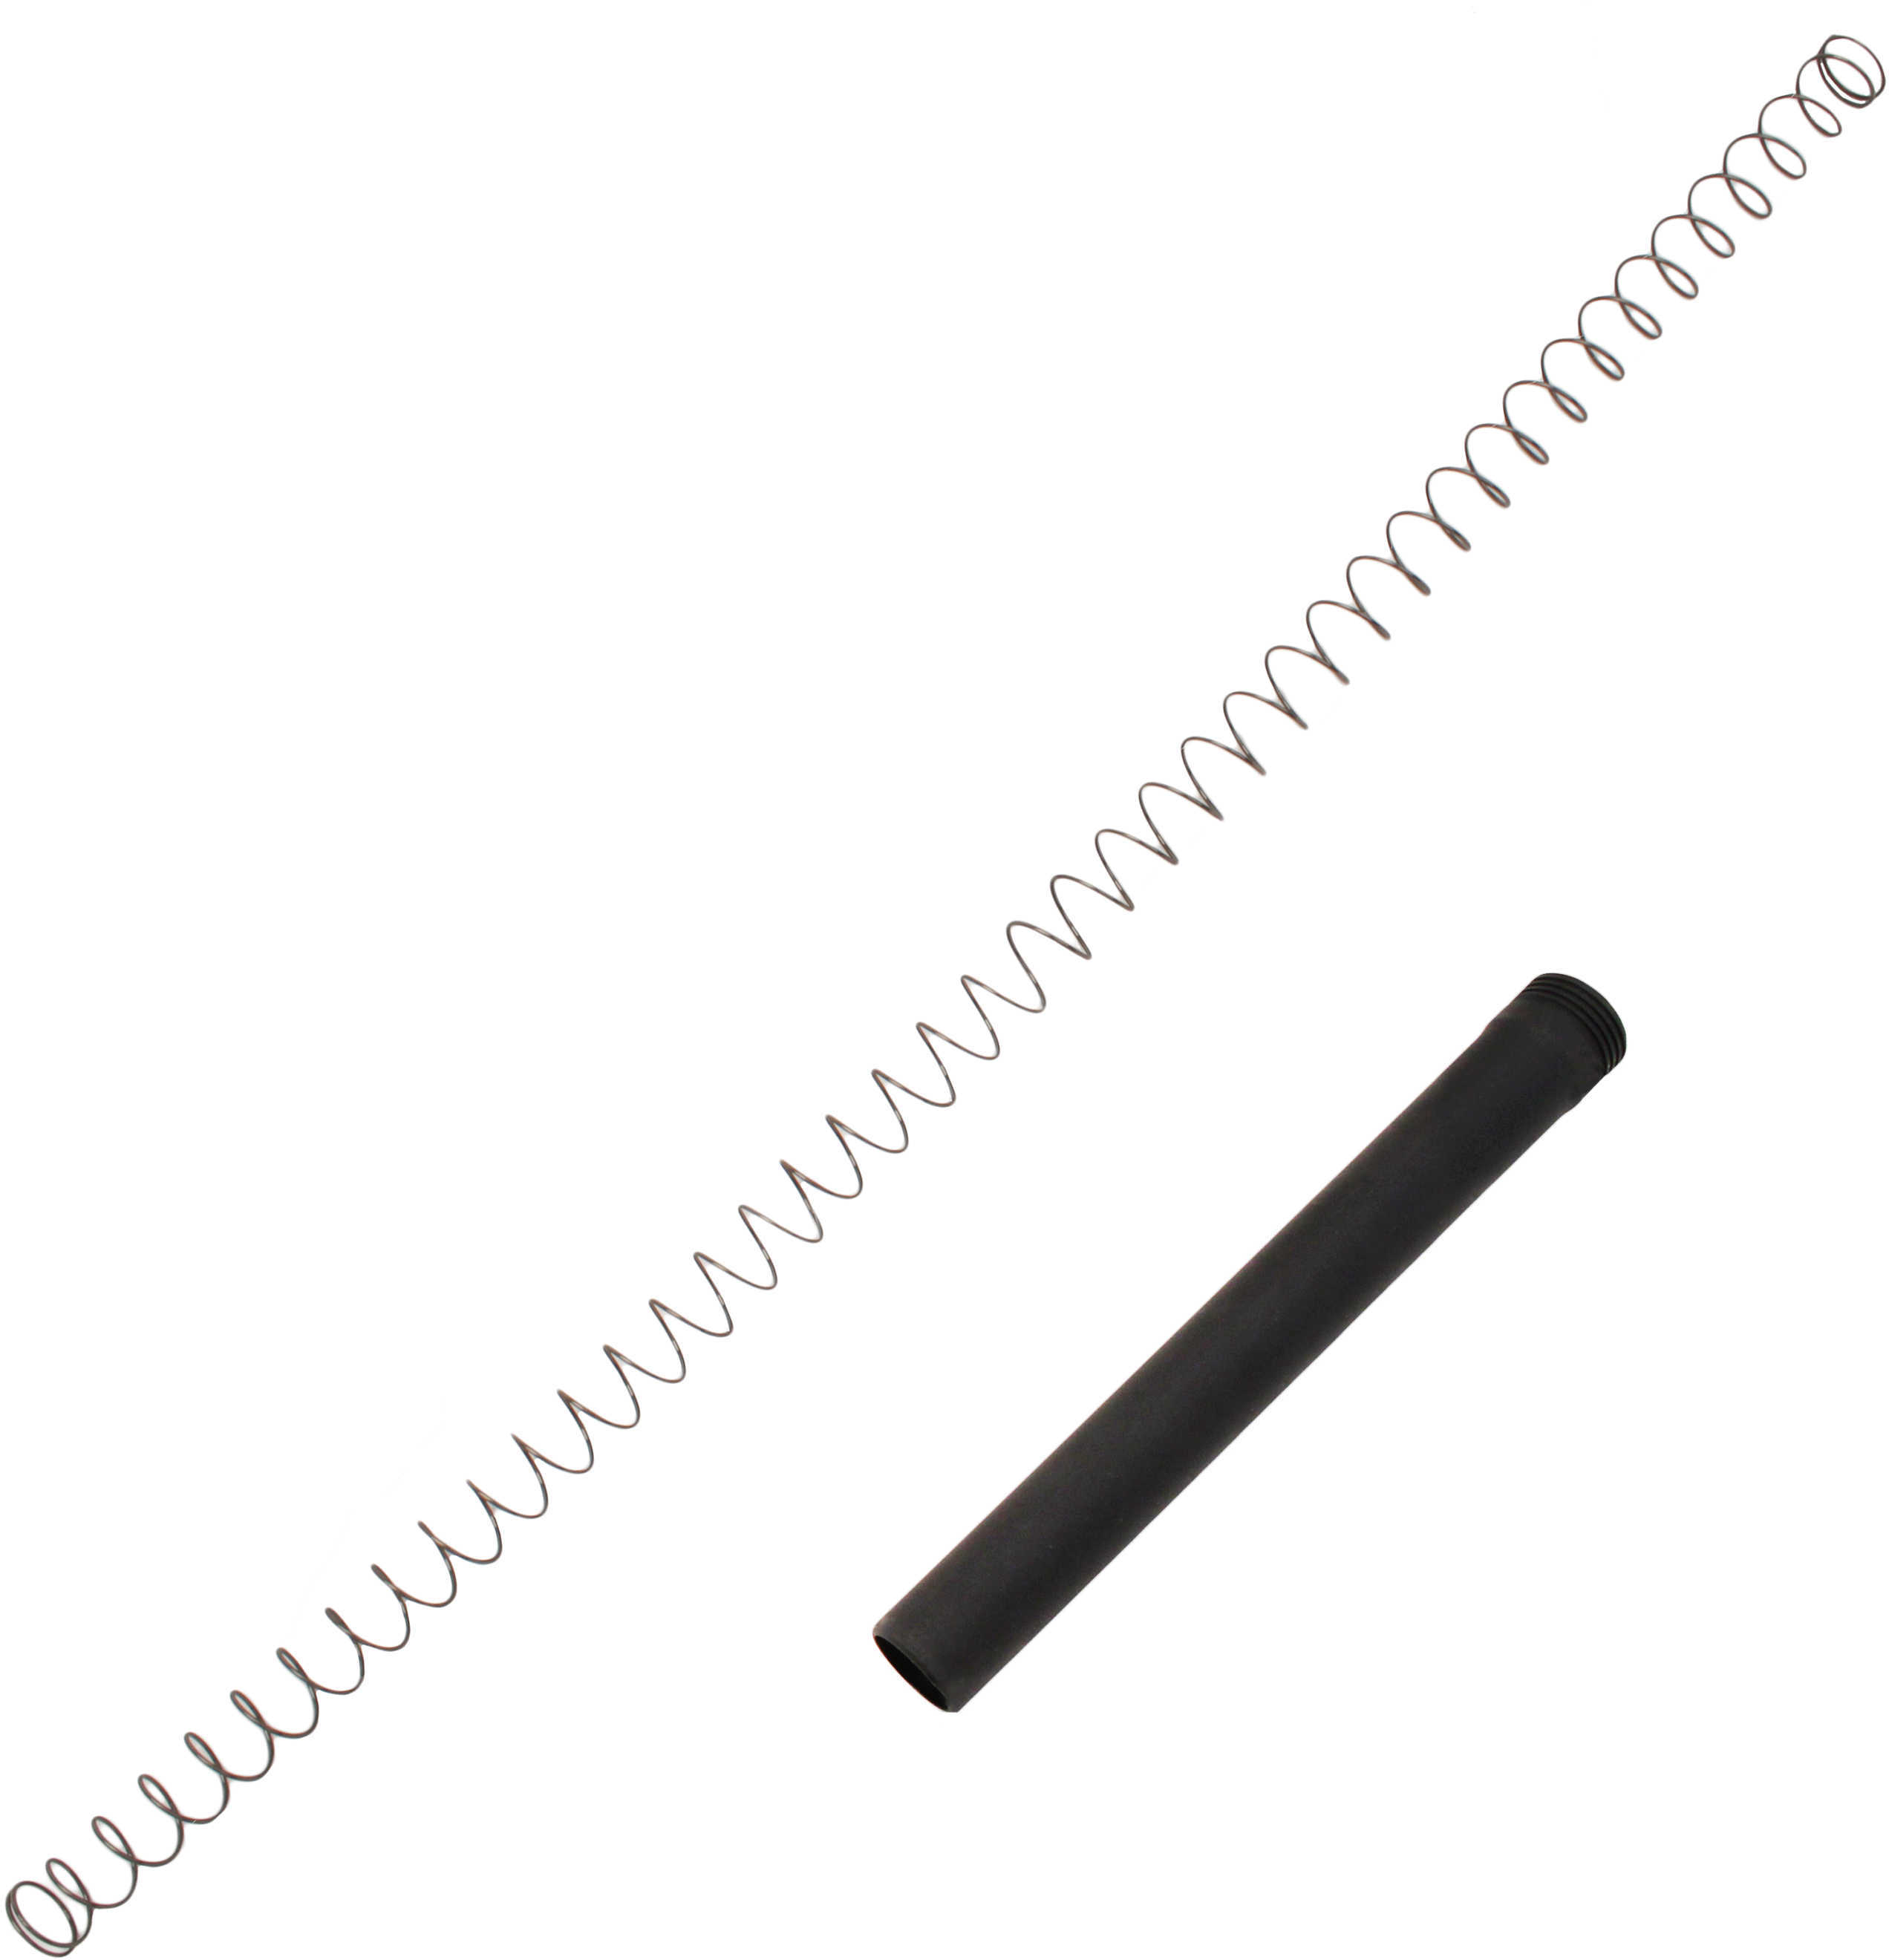 Pachmayr TacStar 8 Round Black Magazine Extension For Remington 870/1100/1187 Md: 1081170